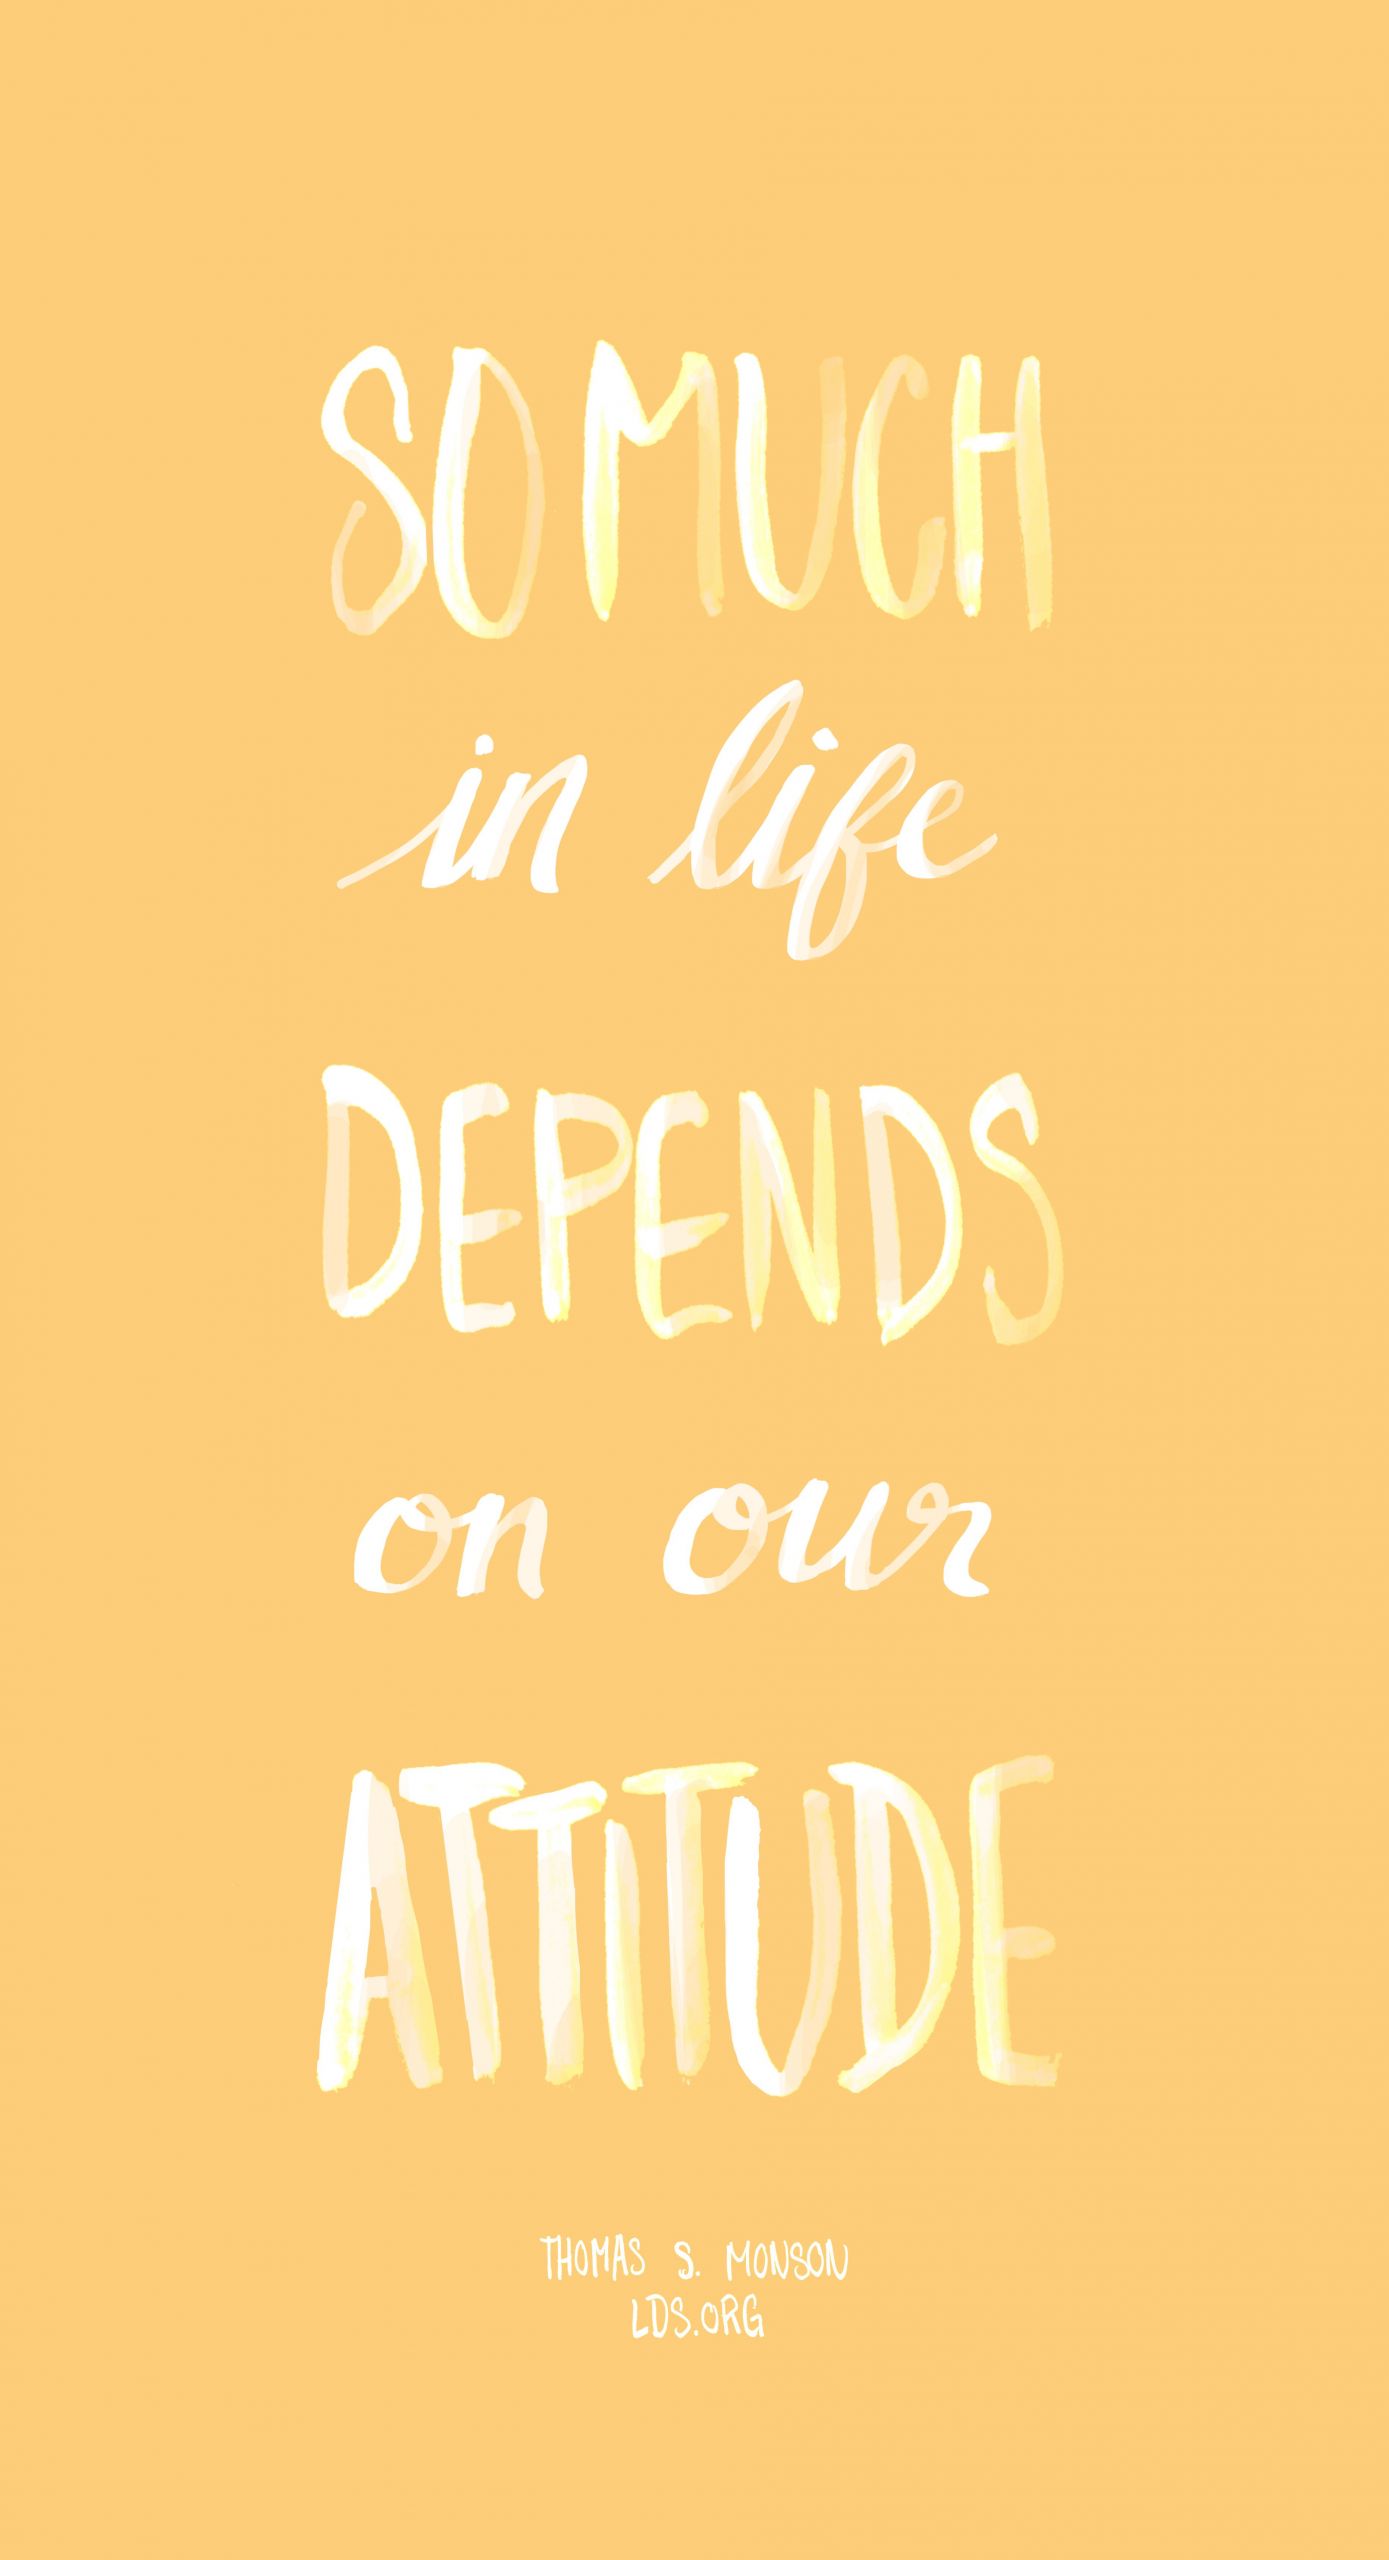 Lds Positive Quotes
 So much in life depends on our attitude —Thomas S Monson